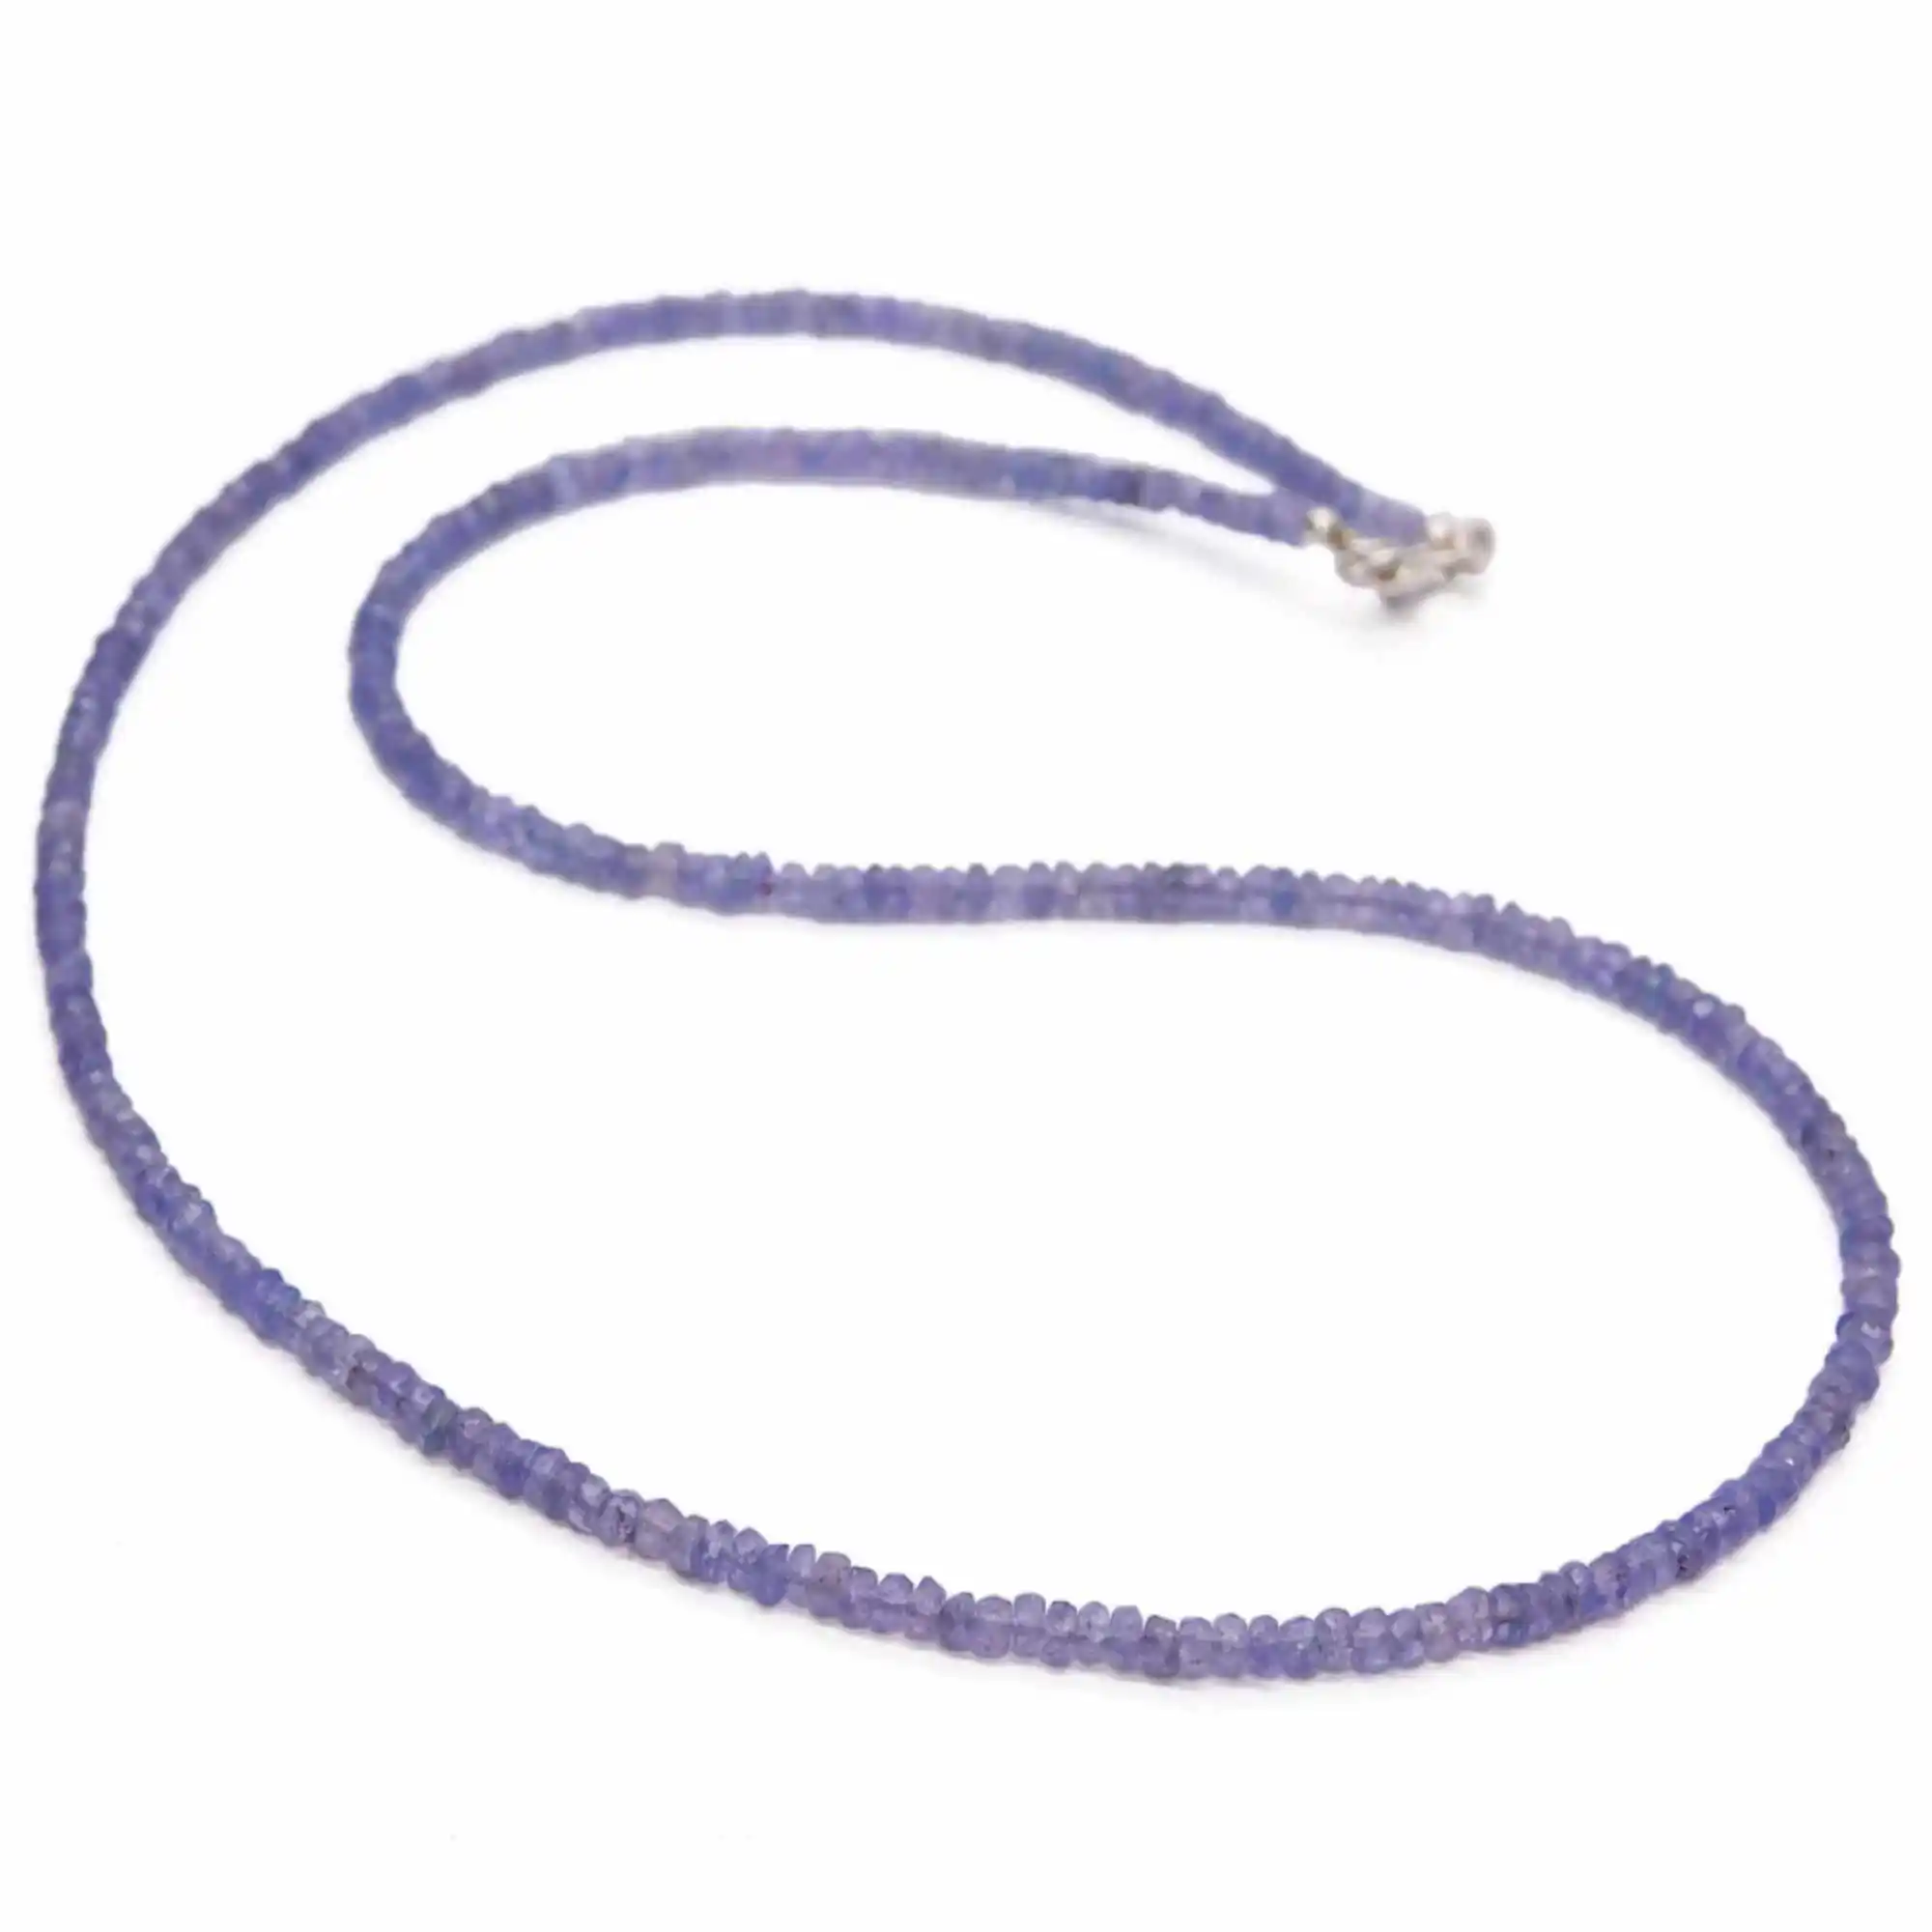 

Natural blue Tanzanite gemstone beads necklace 18 INCHES Wristband Restore Yoga Energy Practice Cuff Diy Chain Colorful